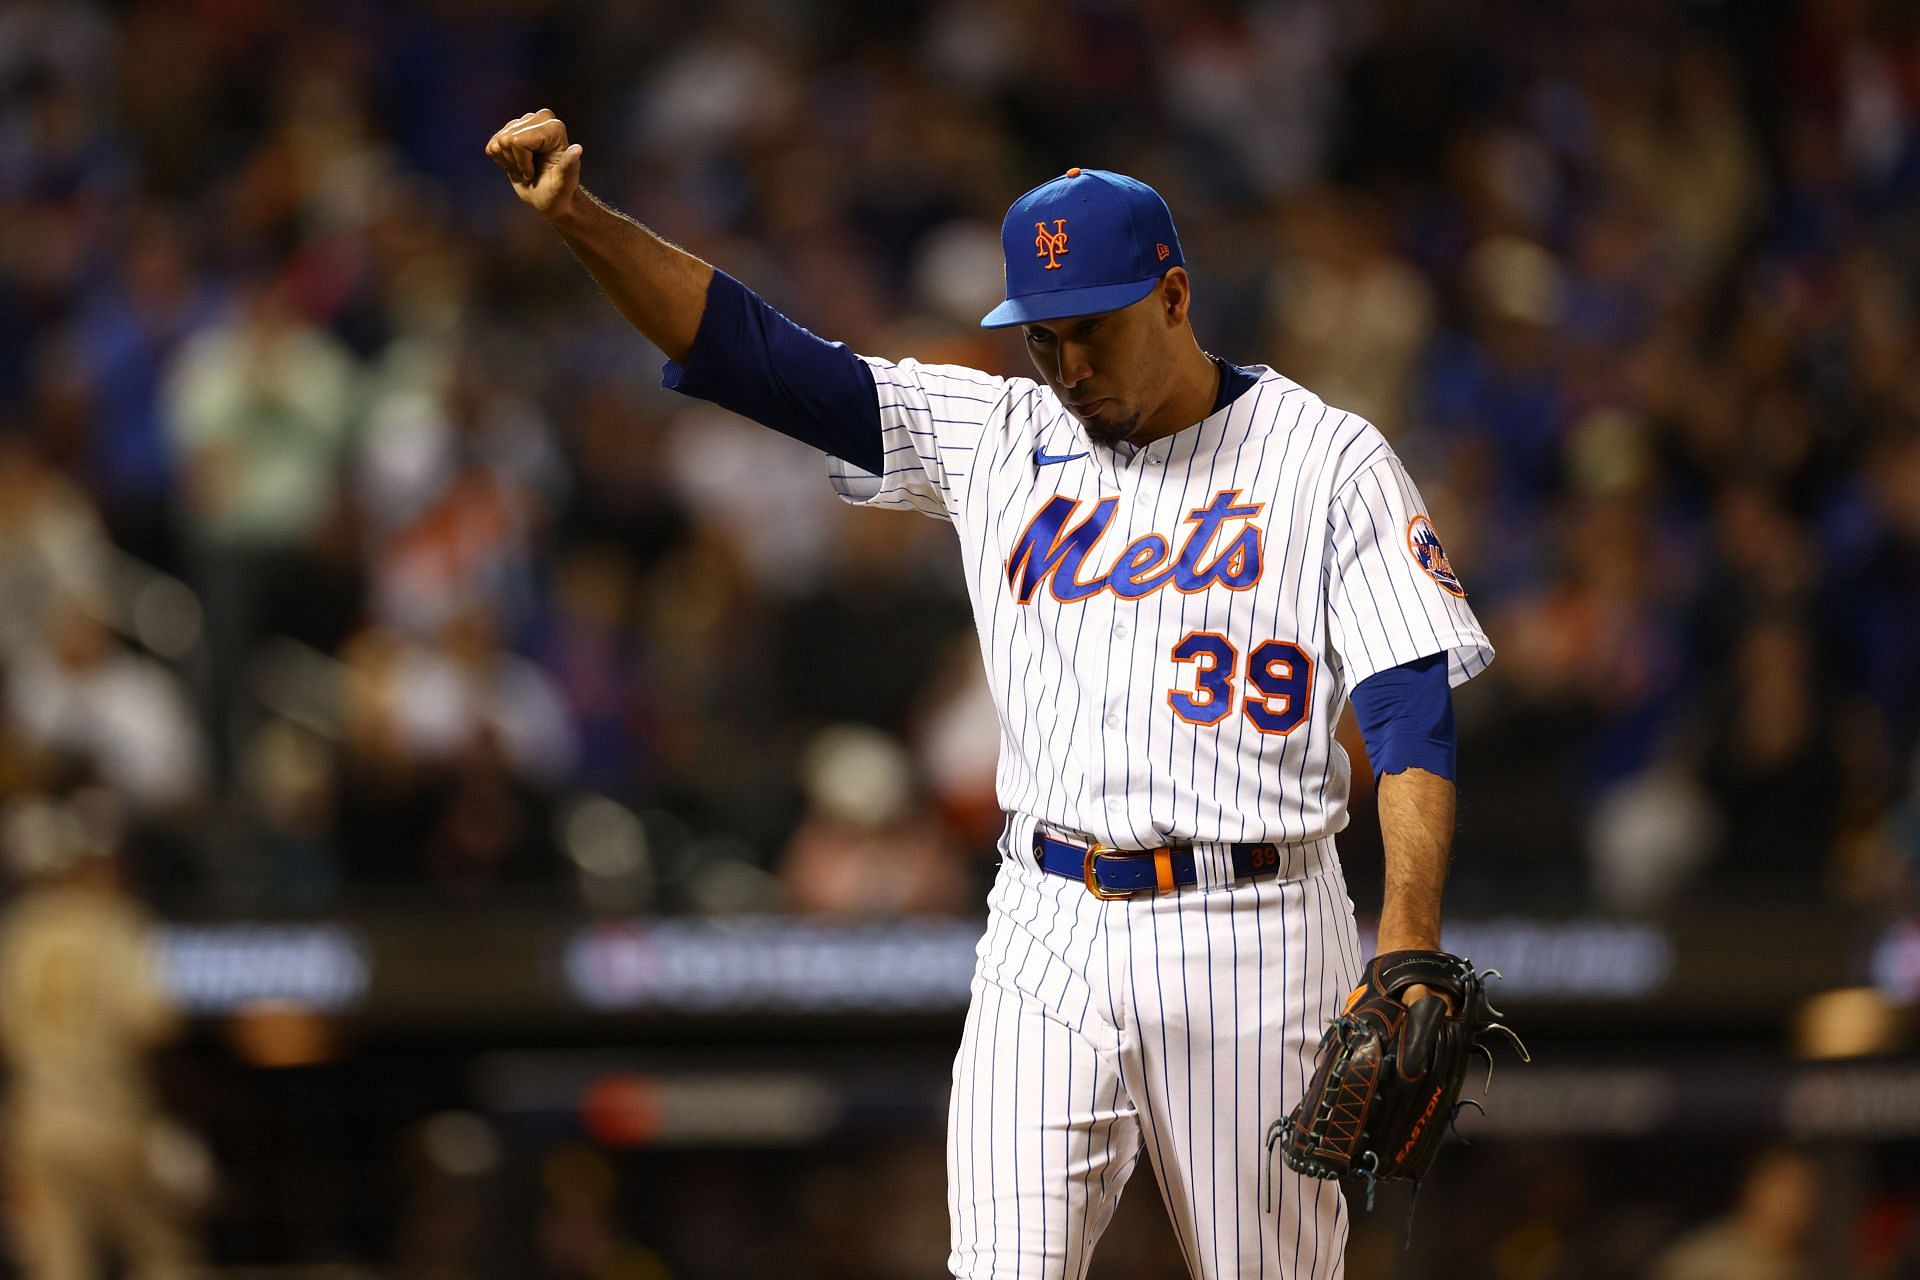 Edwin Diaz has posted a statement following his injury and